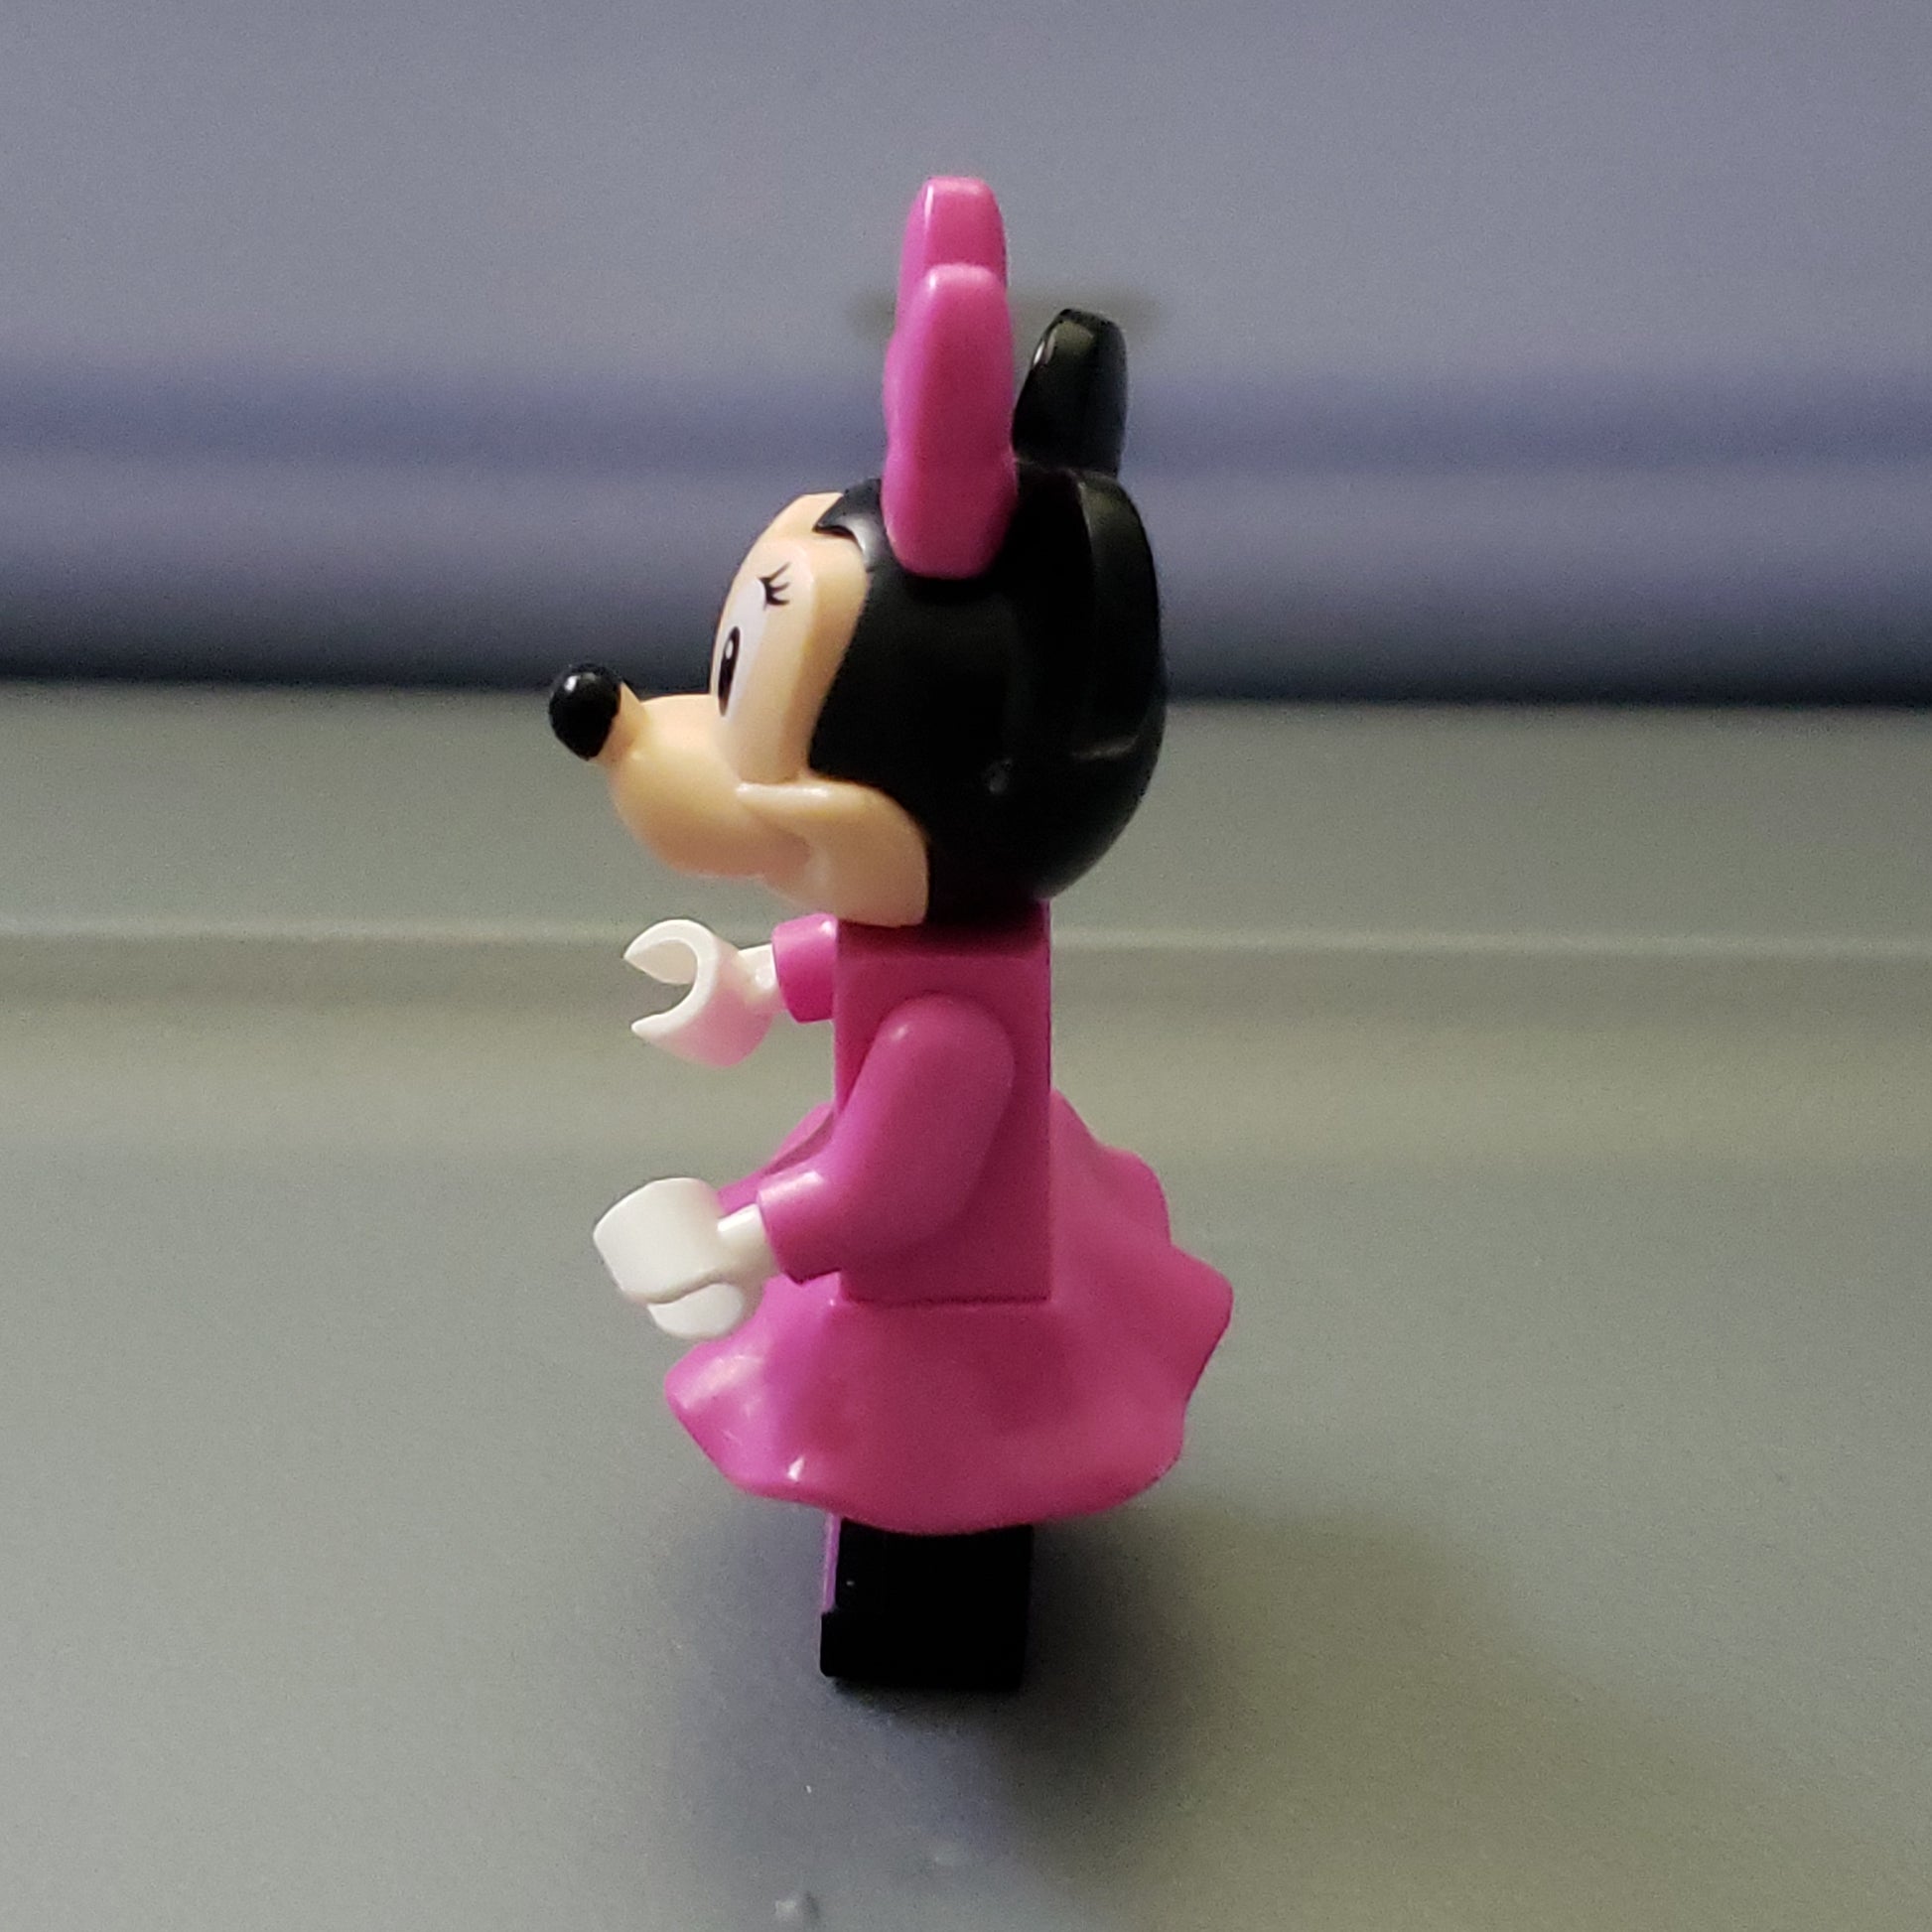 Custom Lego Compatible Minnie Mouse Minifig